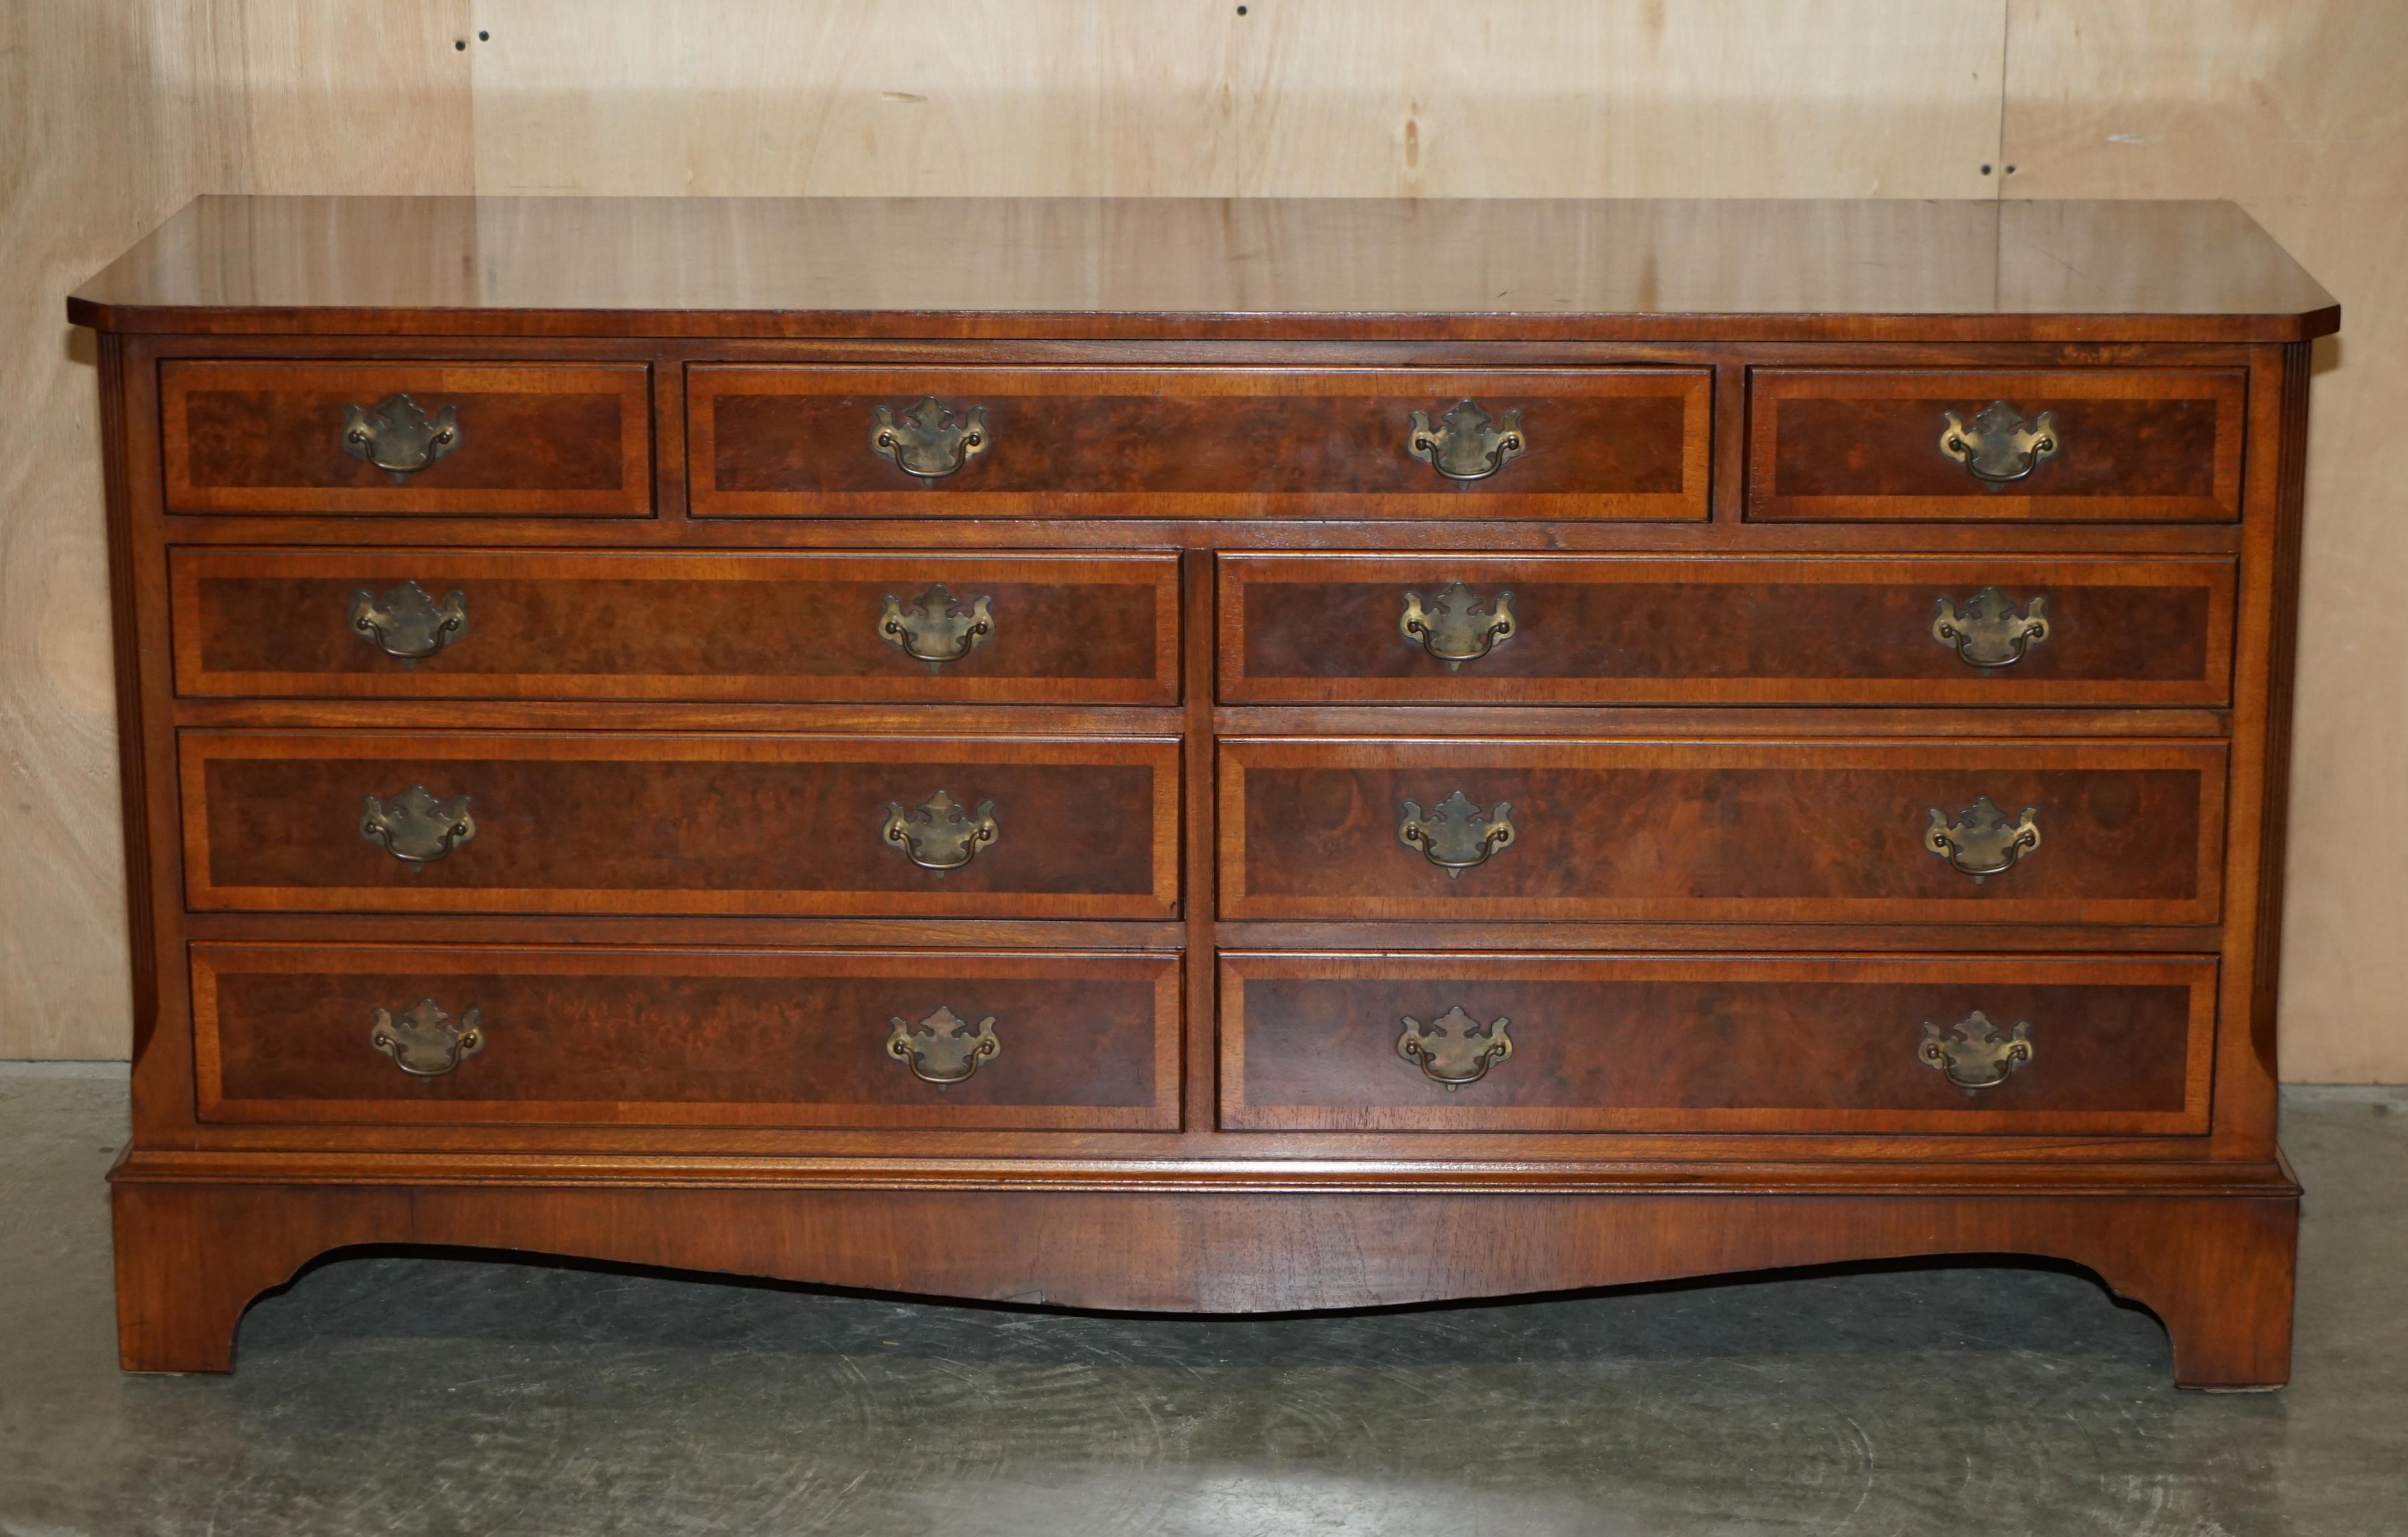 We are delighted to offer for sale this exquisite vintage quarter cut Burr & Burl walnut sideboard sized chest of drawers with stunning timber patina 

A very good looking and well made piece, this is basically art furniture, the grain of timber